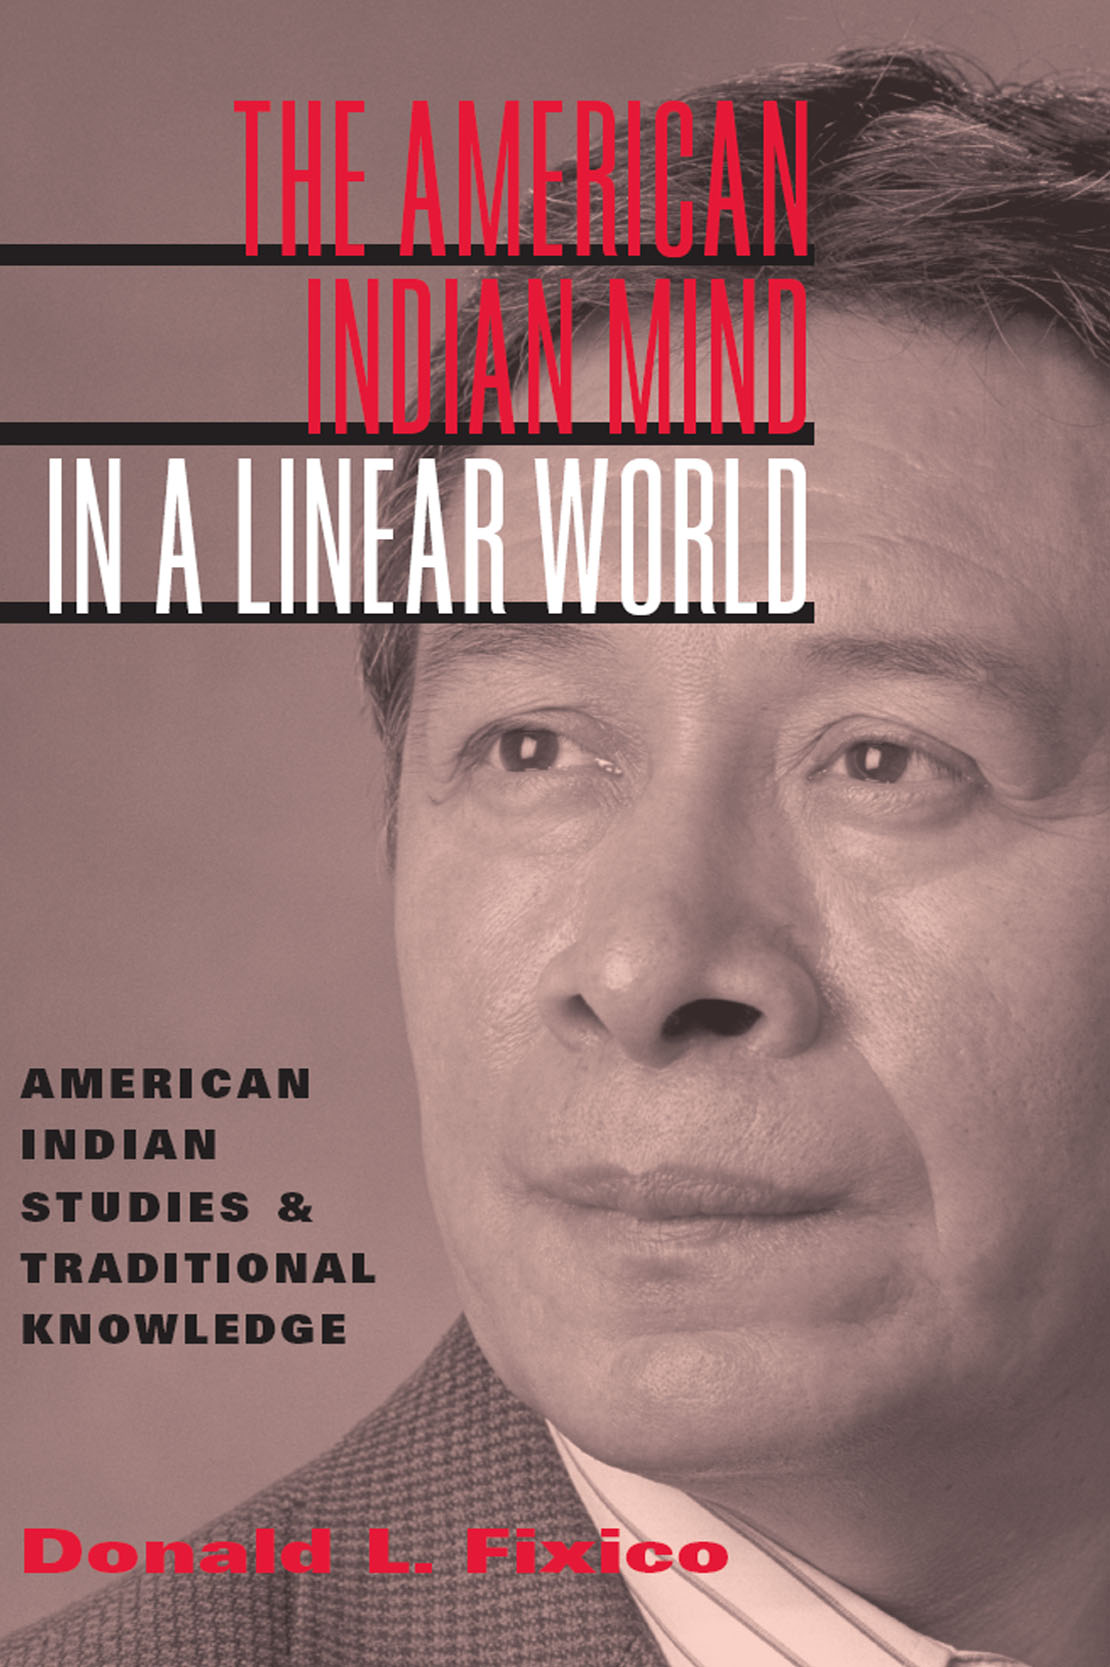 The American Indian mind in a linear world American Indian studies and traditional knowledge - image 1